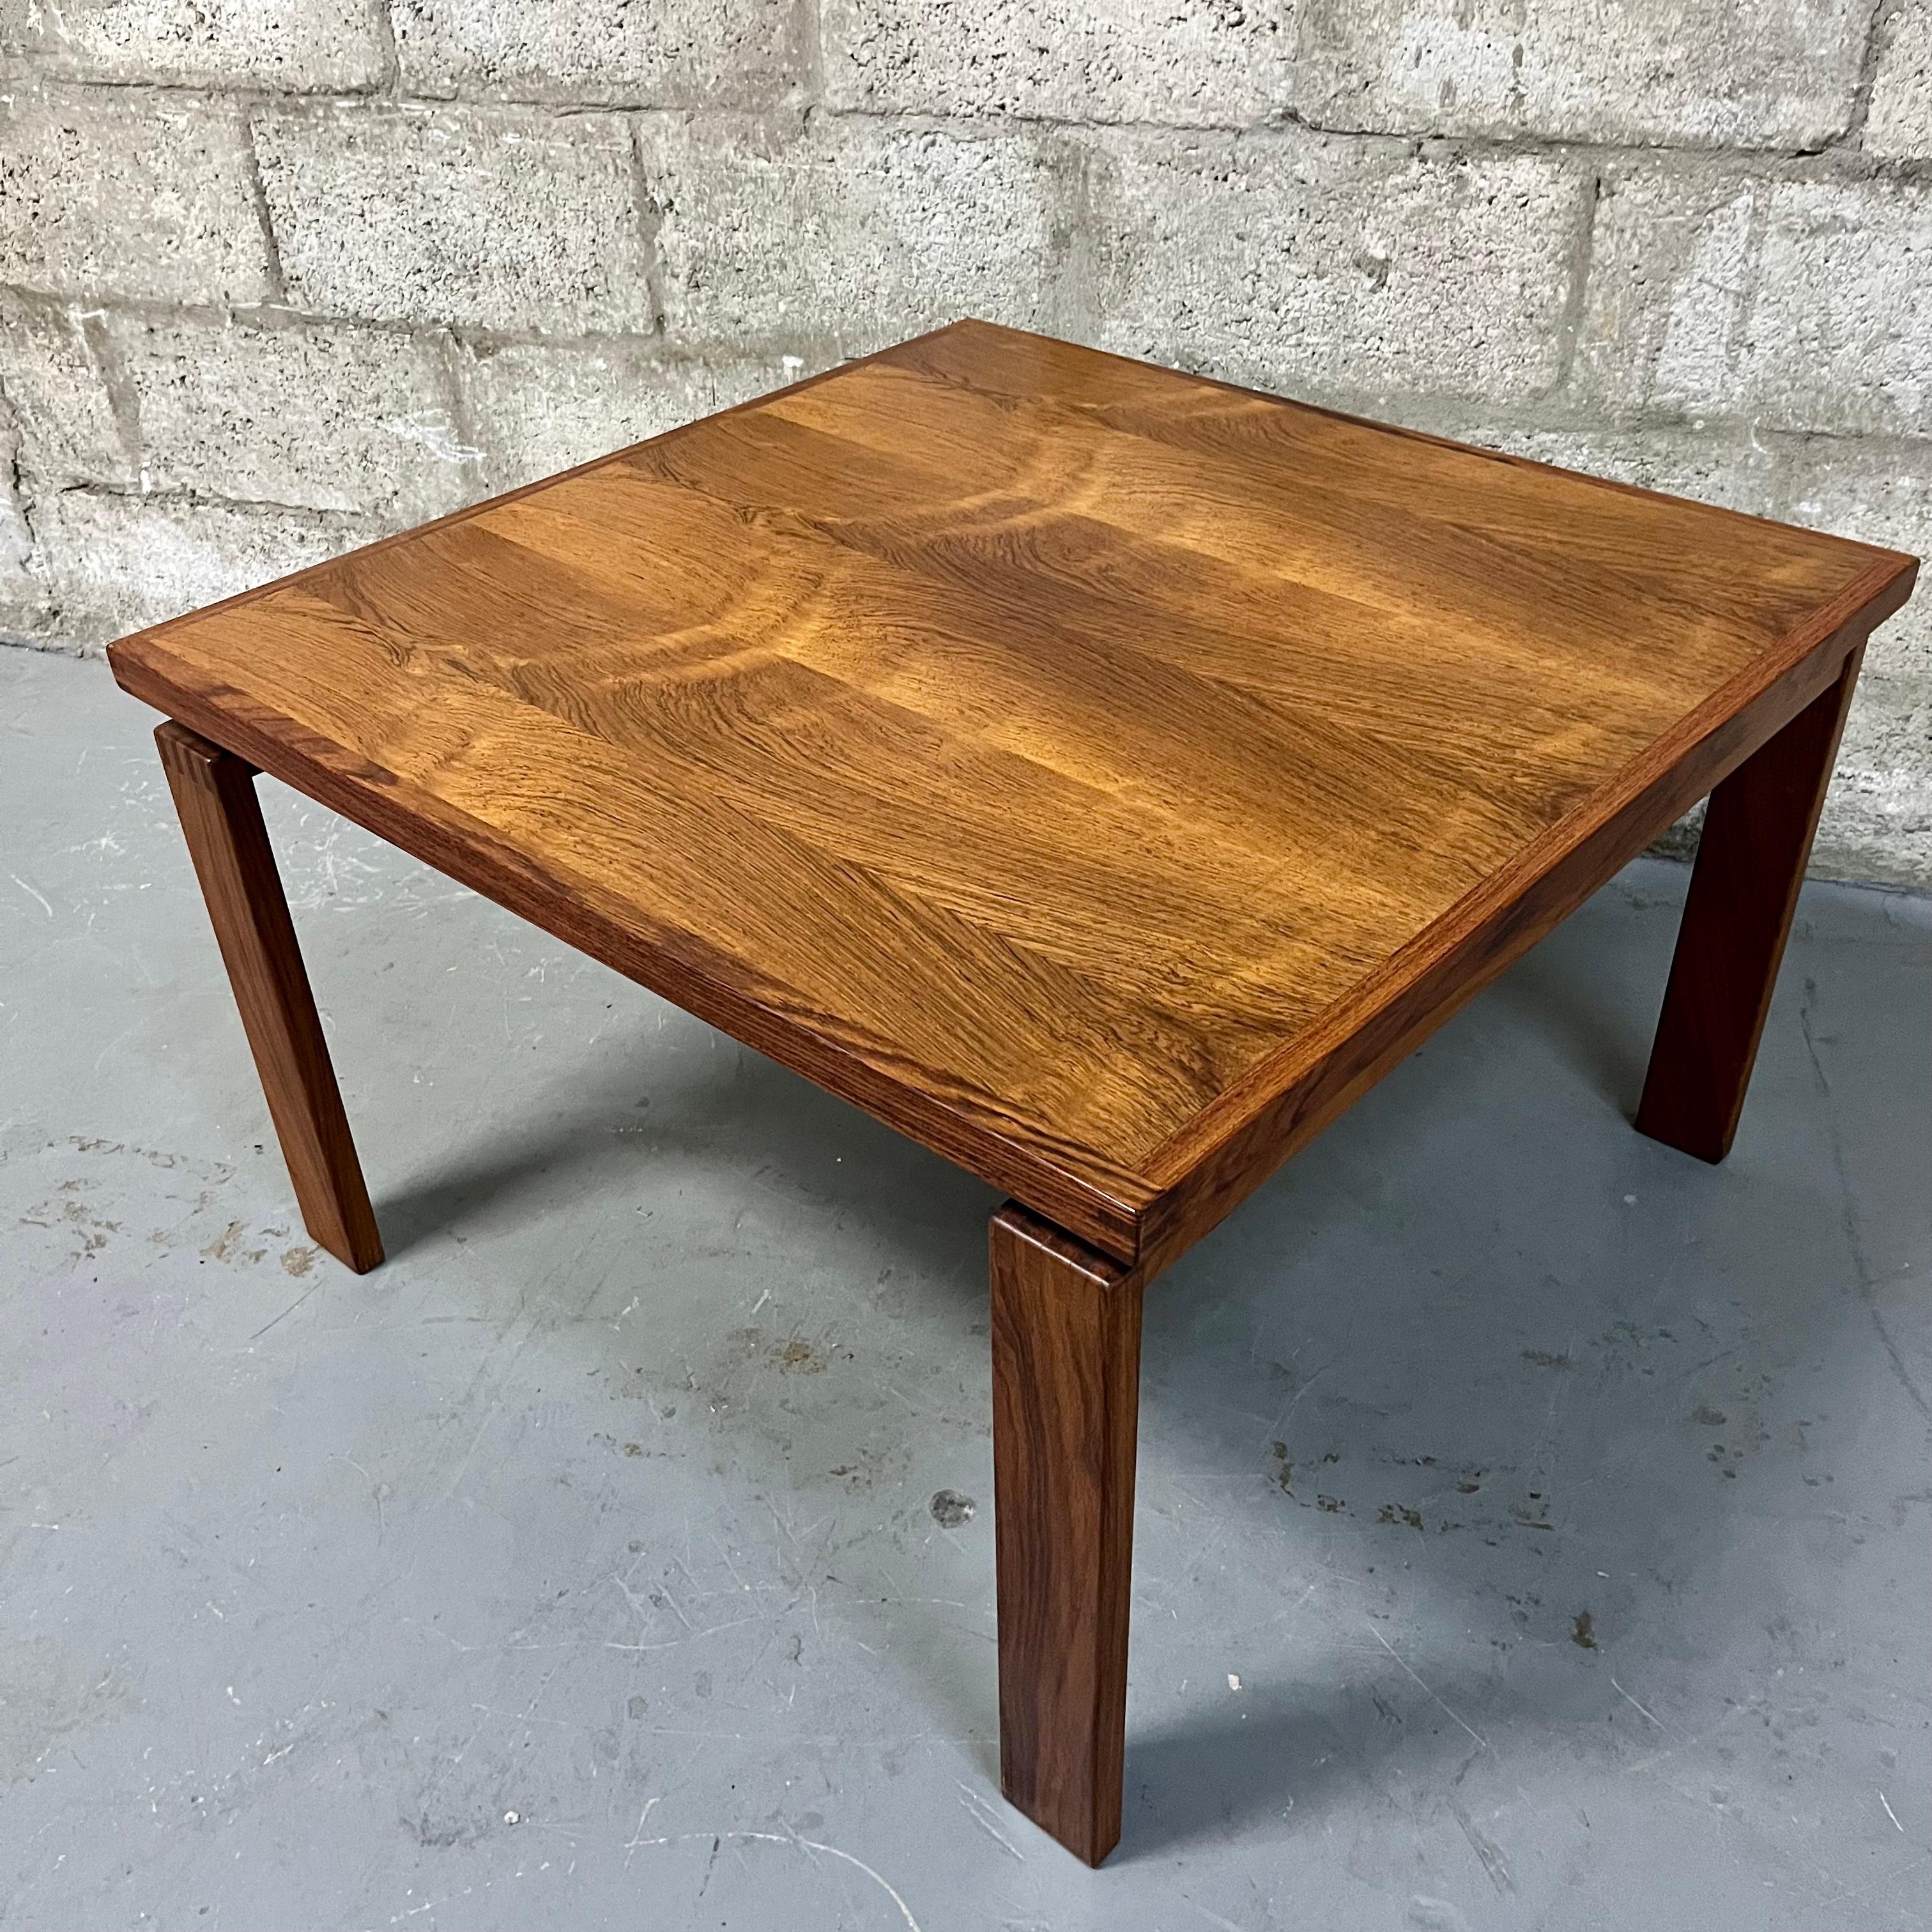 1970s Danish Mid Century Modern Floating Coffee Table in the Jens Risom's Style  In Good Condition For Sale In Miami, FL